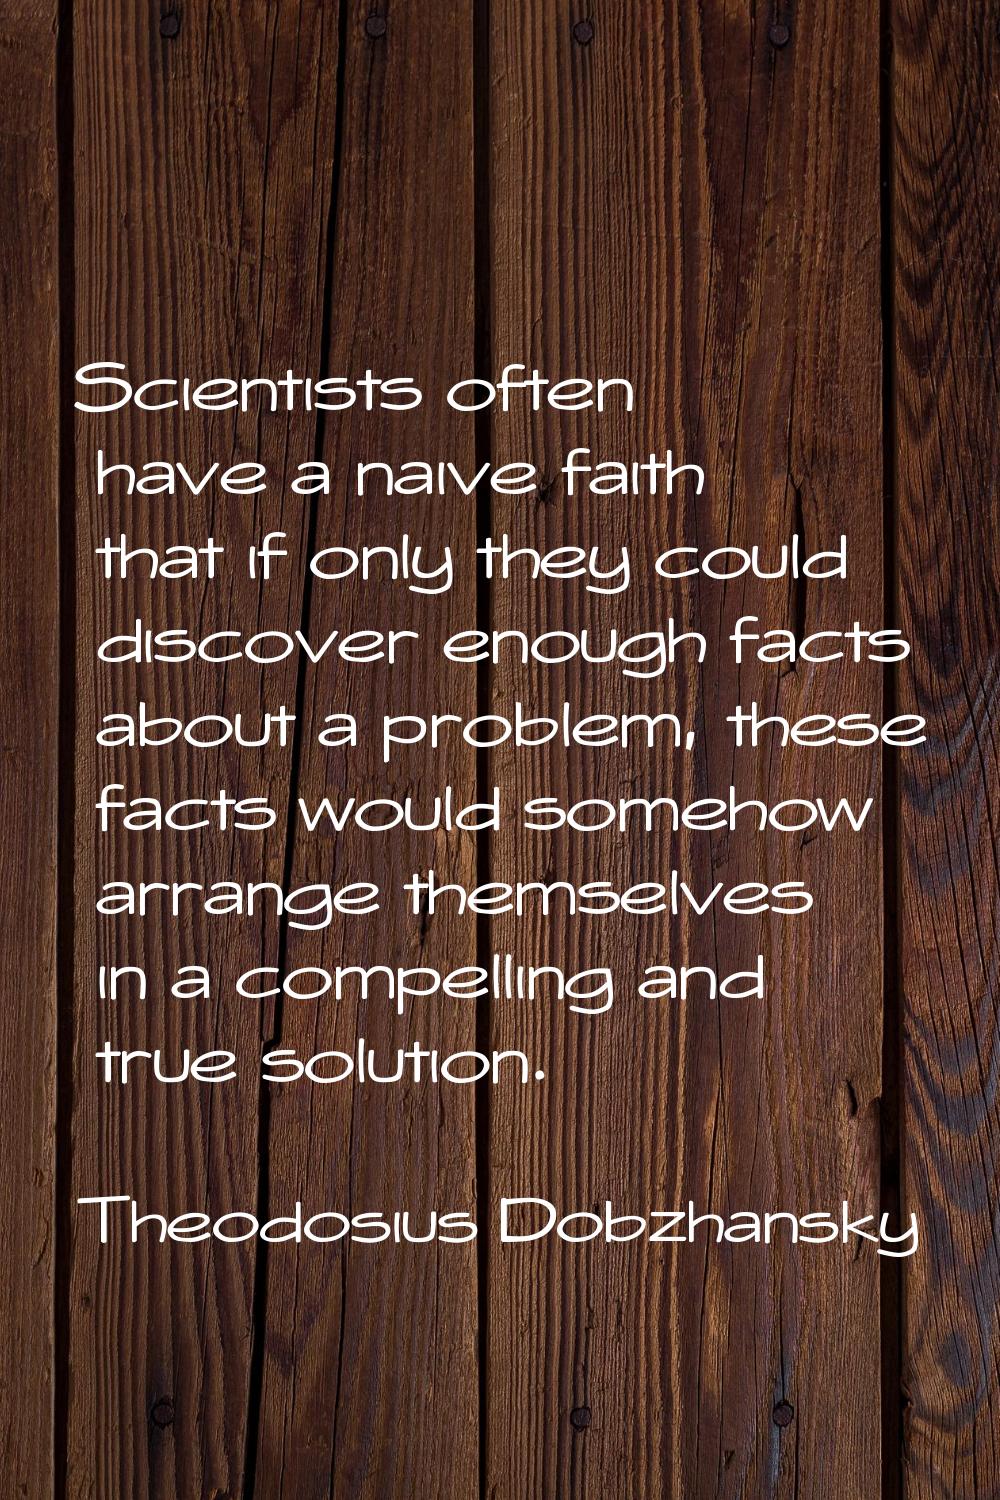 Scientists often have a naive faith that if only they could discover enough facts about a problem, 